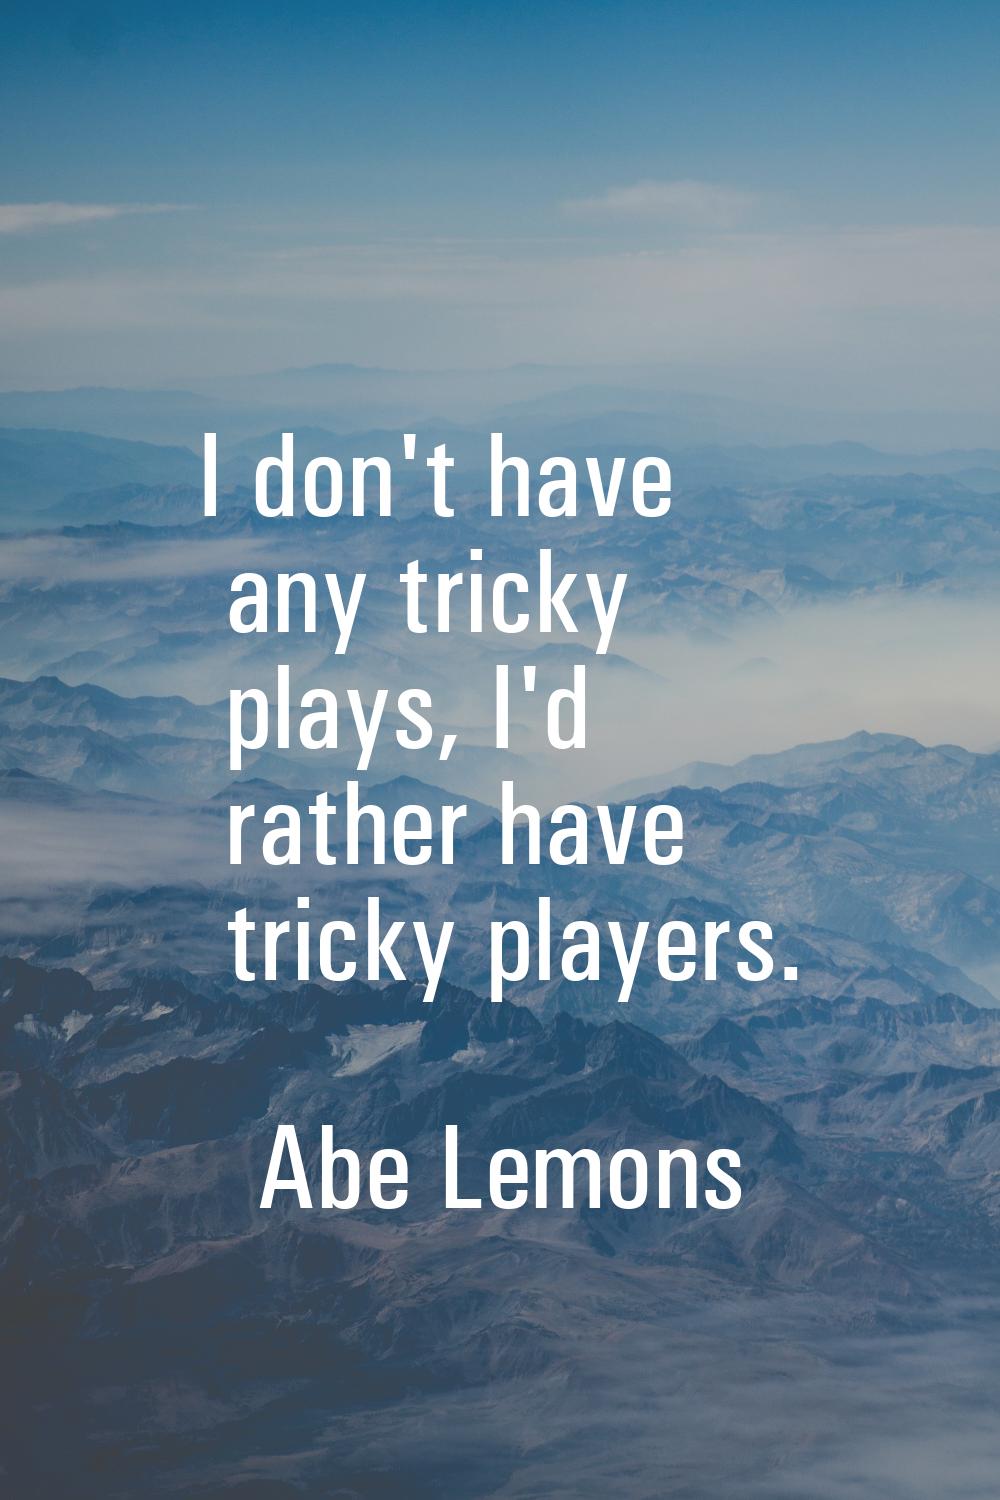 I don't have any tricky plays, I'd rather have tricky players.